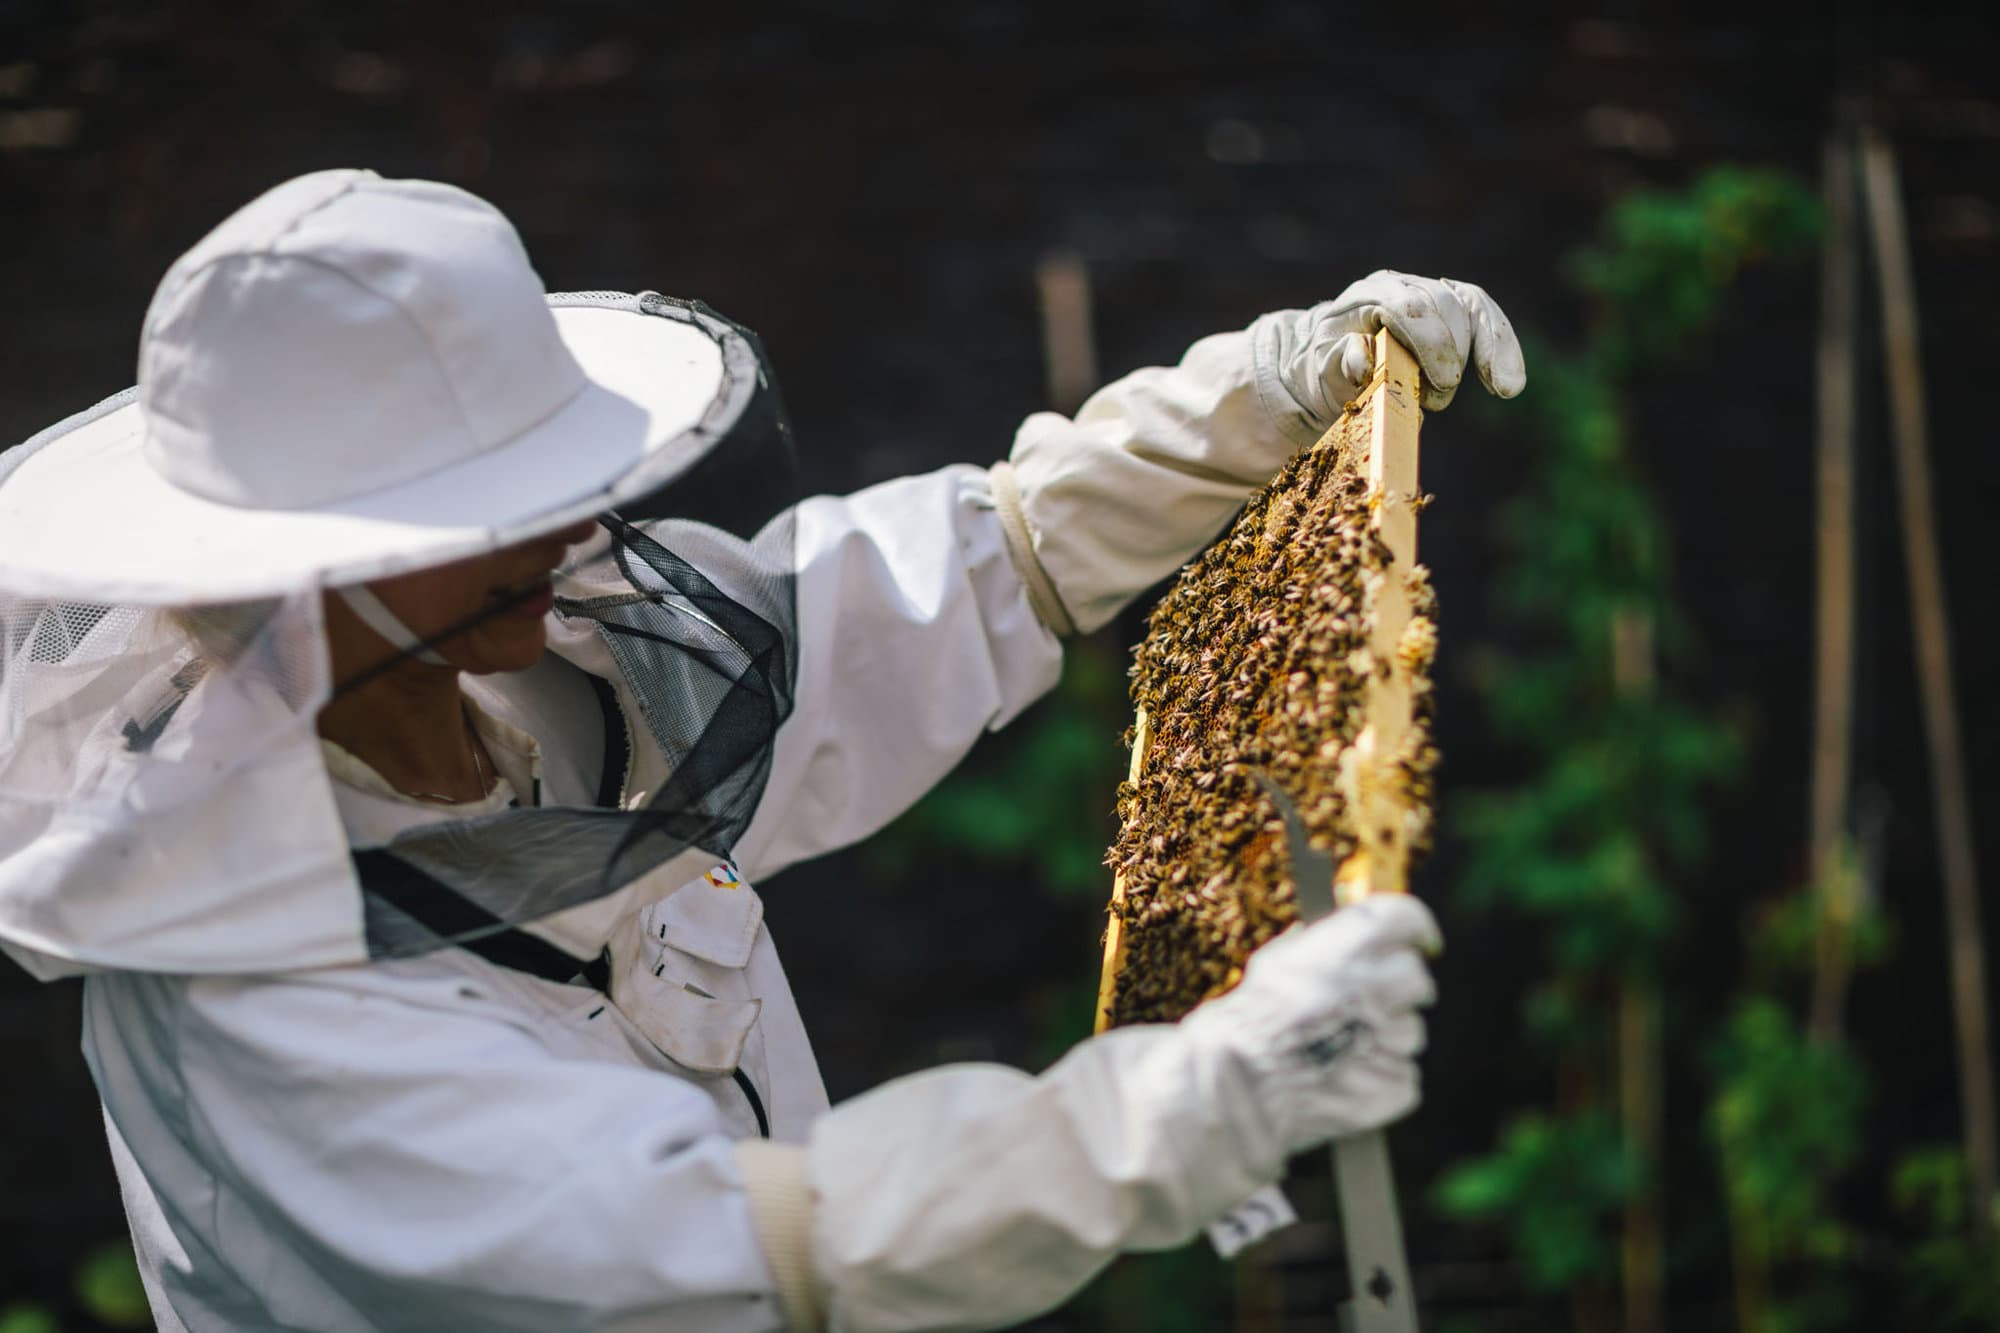 Anoushka de Graaf, beekeeper at The Dylan Amsterdam, leading hotels of the world, holding a comb of honey that she just took out the beehive.